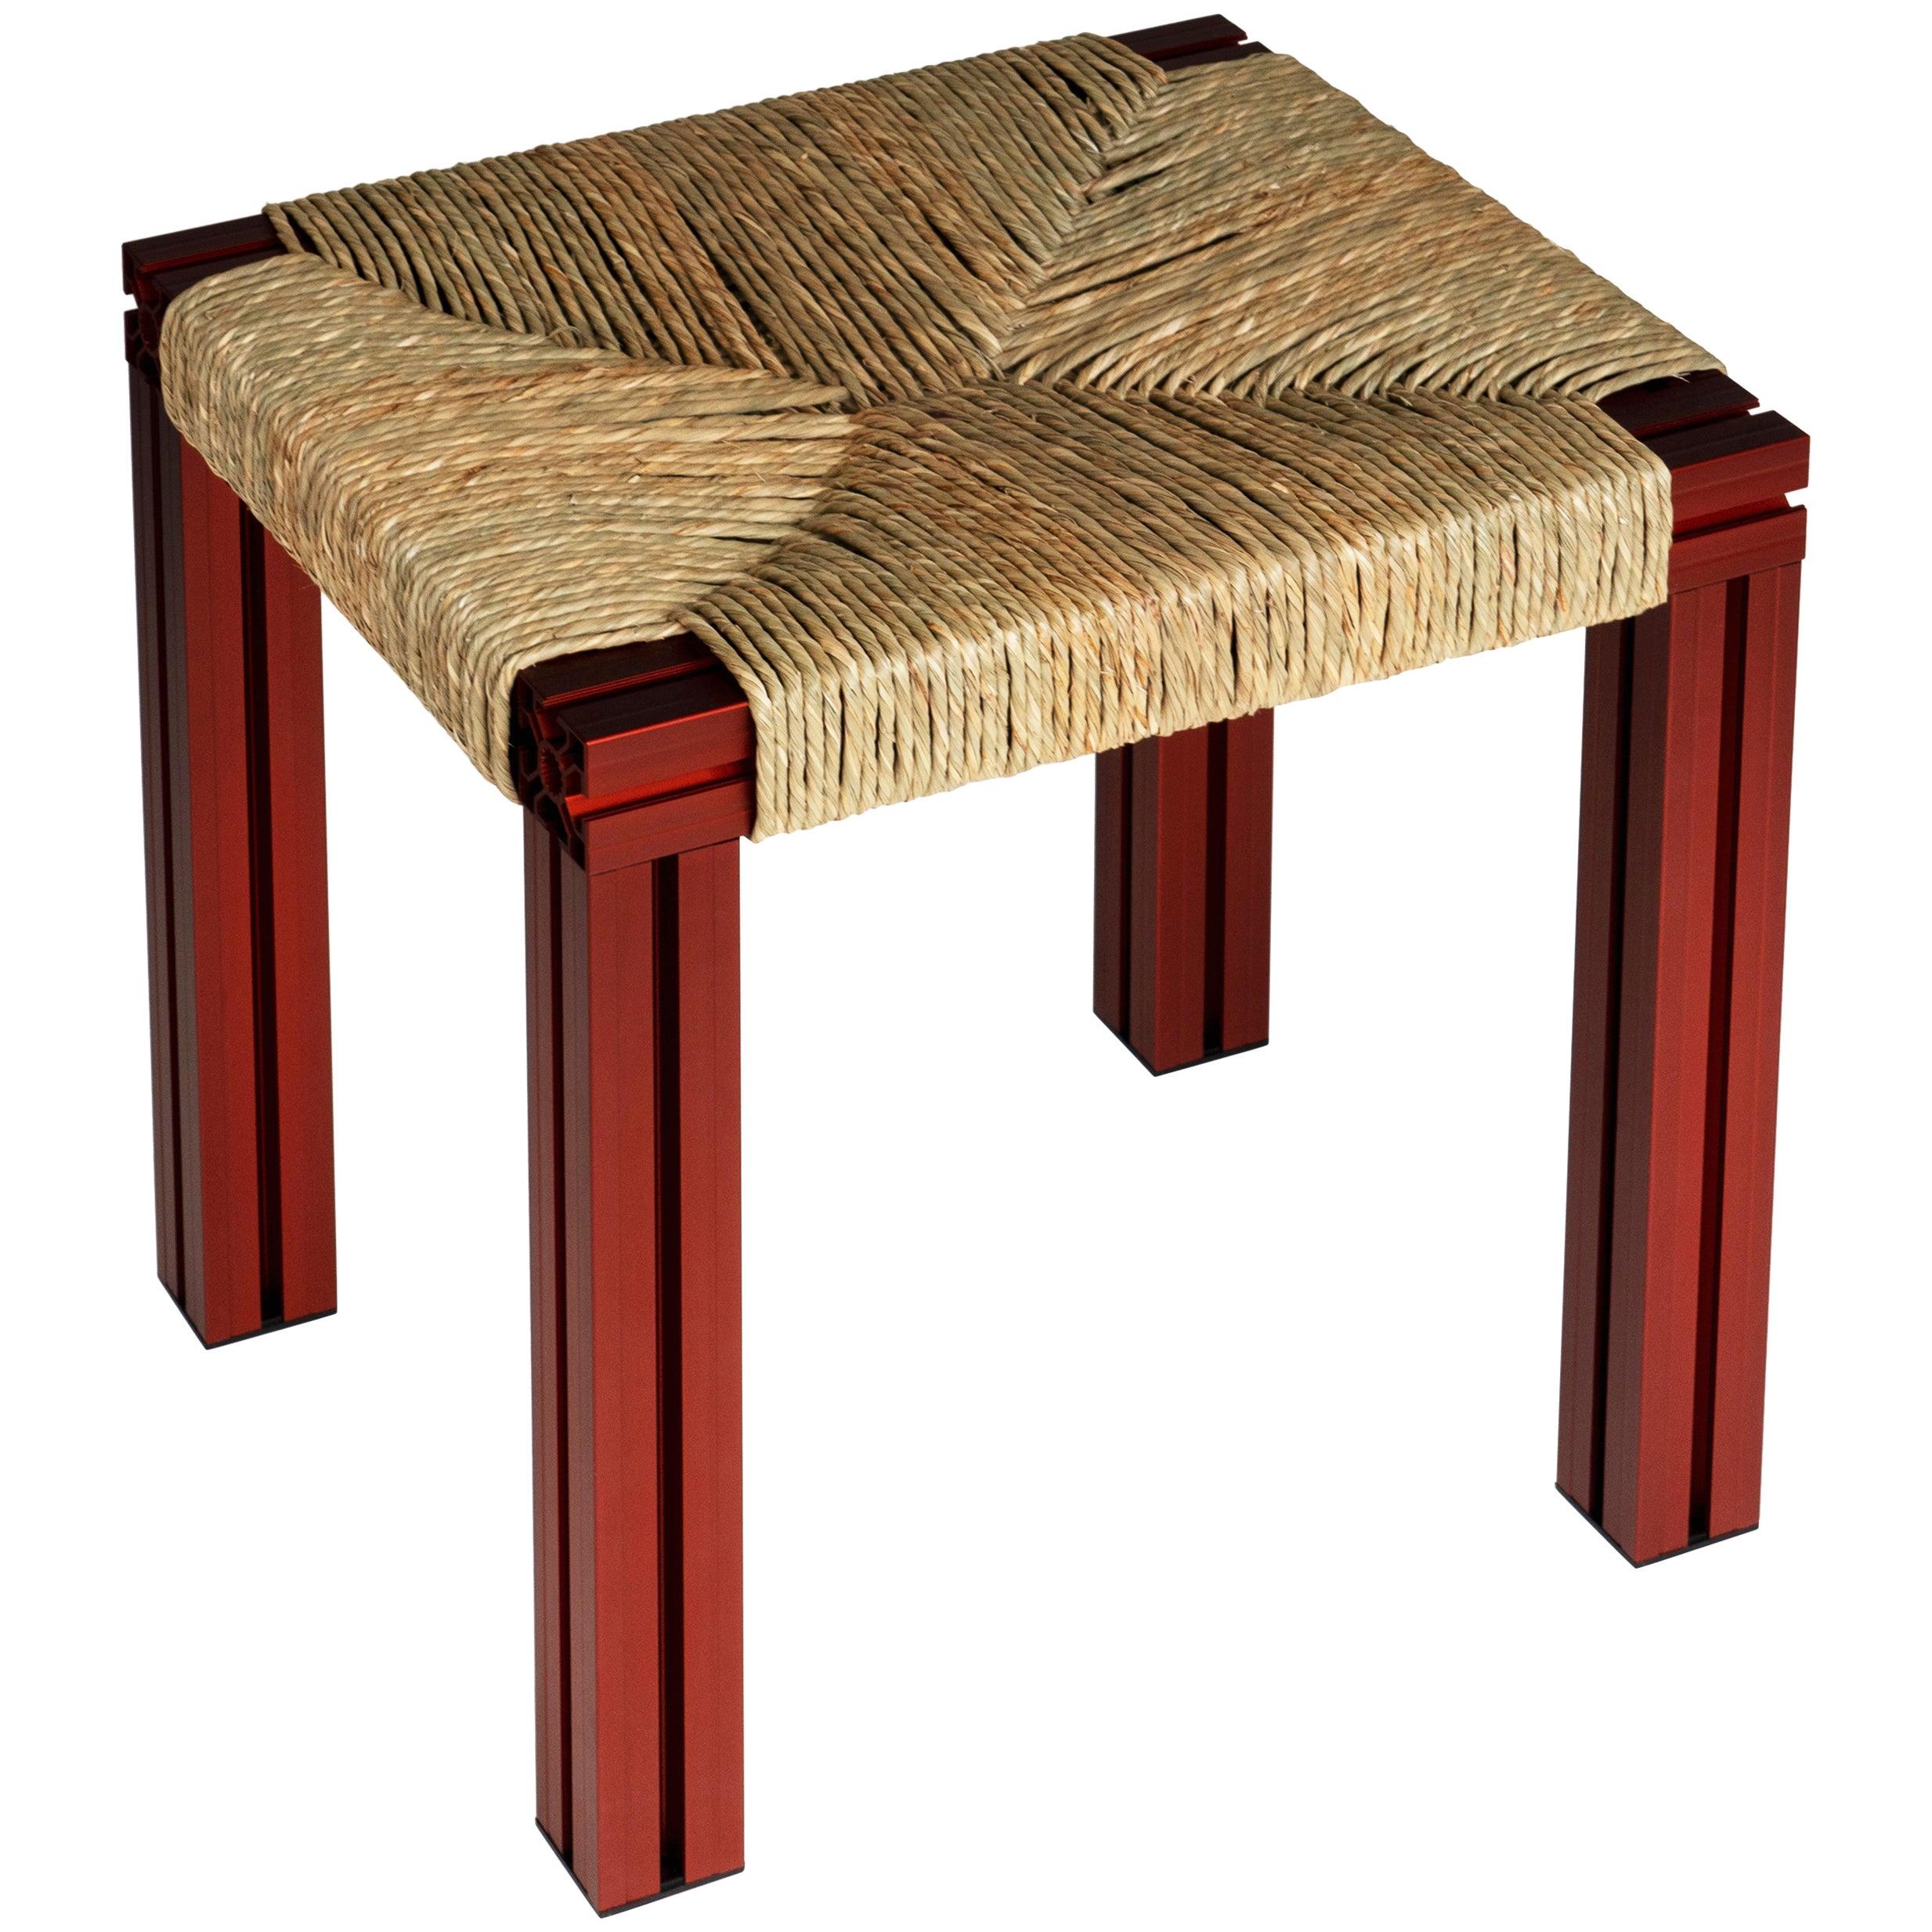 Red Aluminium Stool with Reel Rush Seating from Anodised Wicker Collection